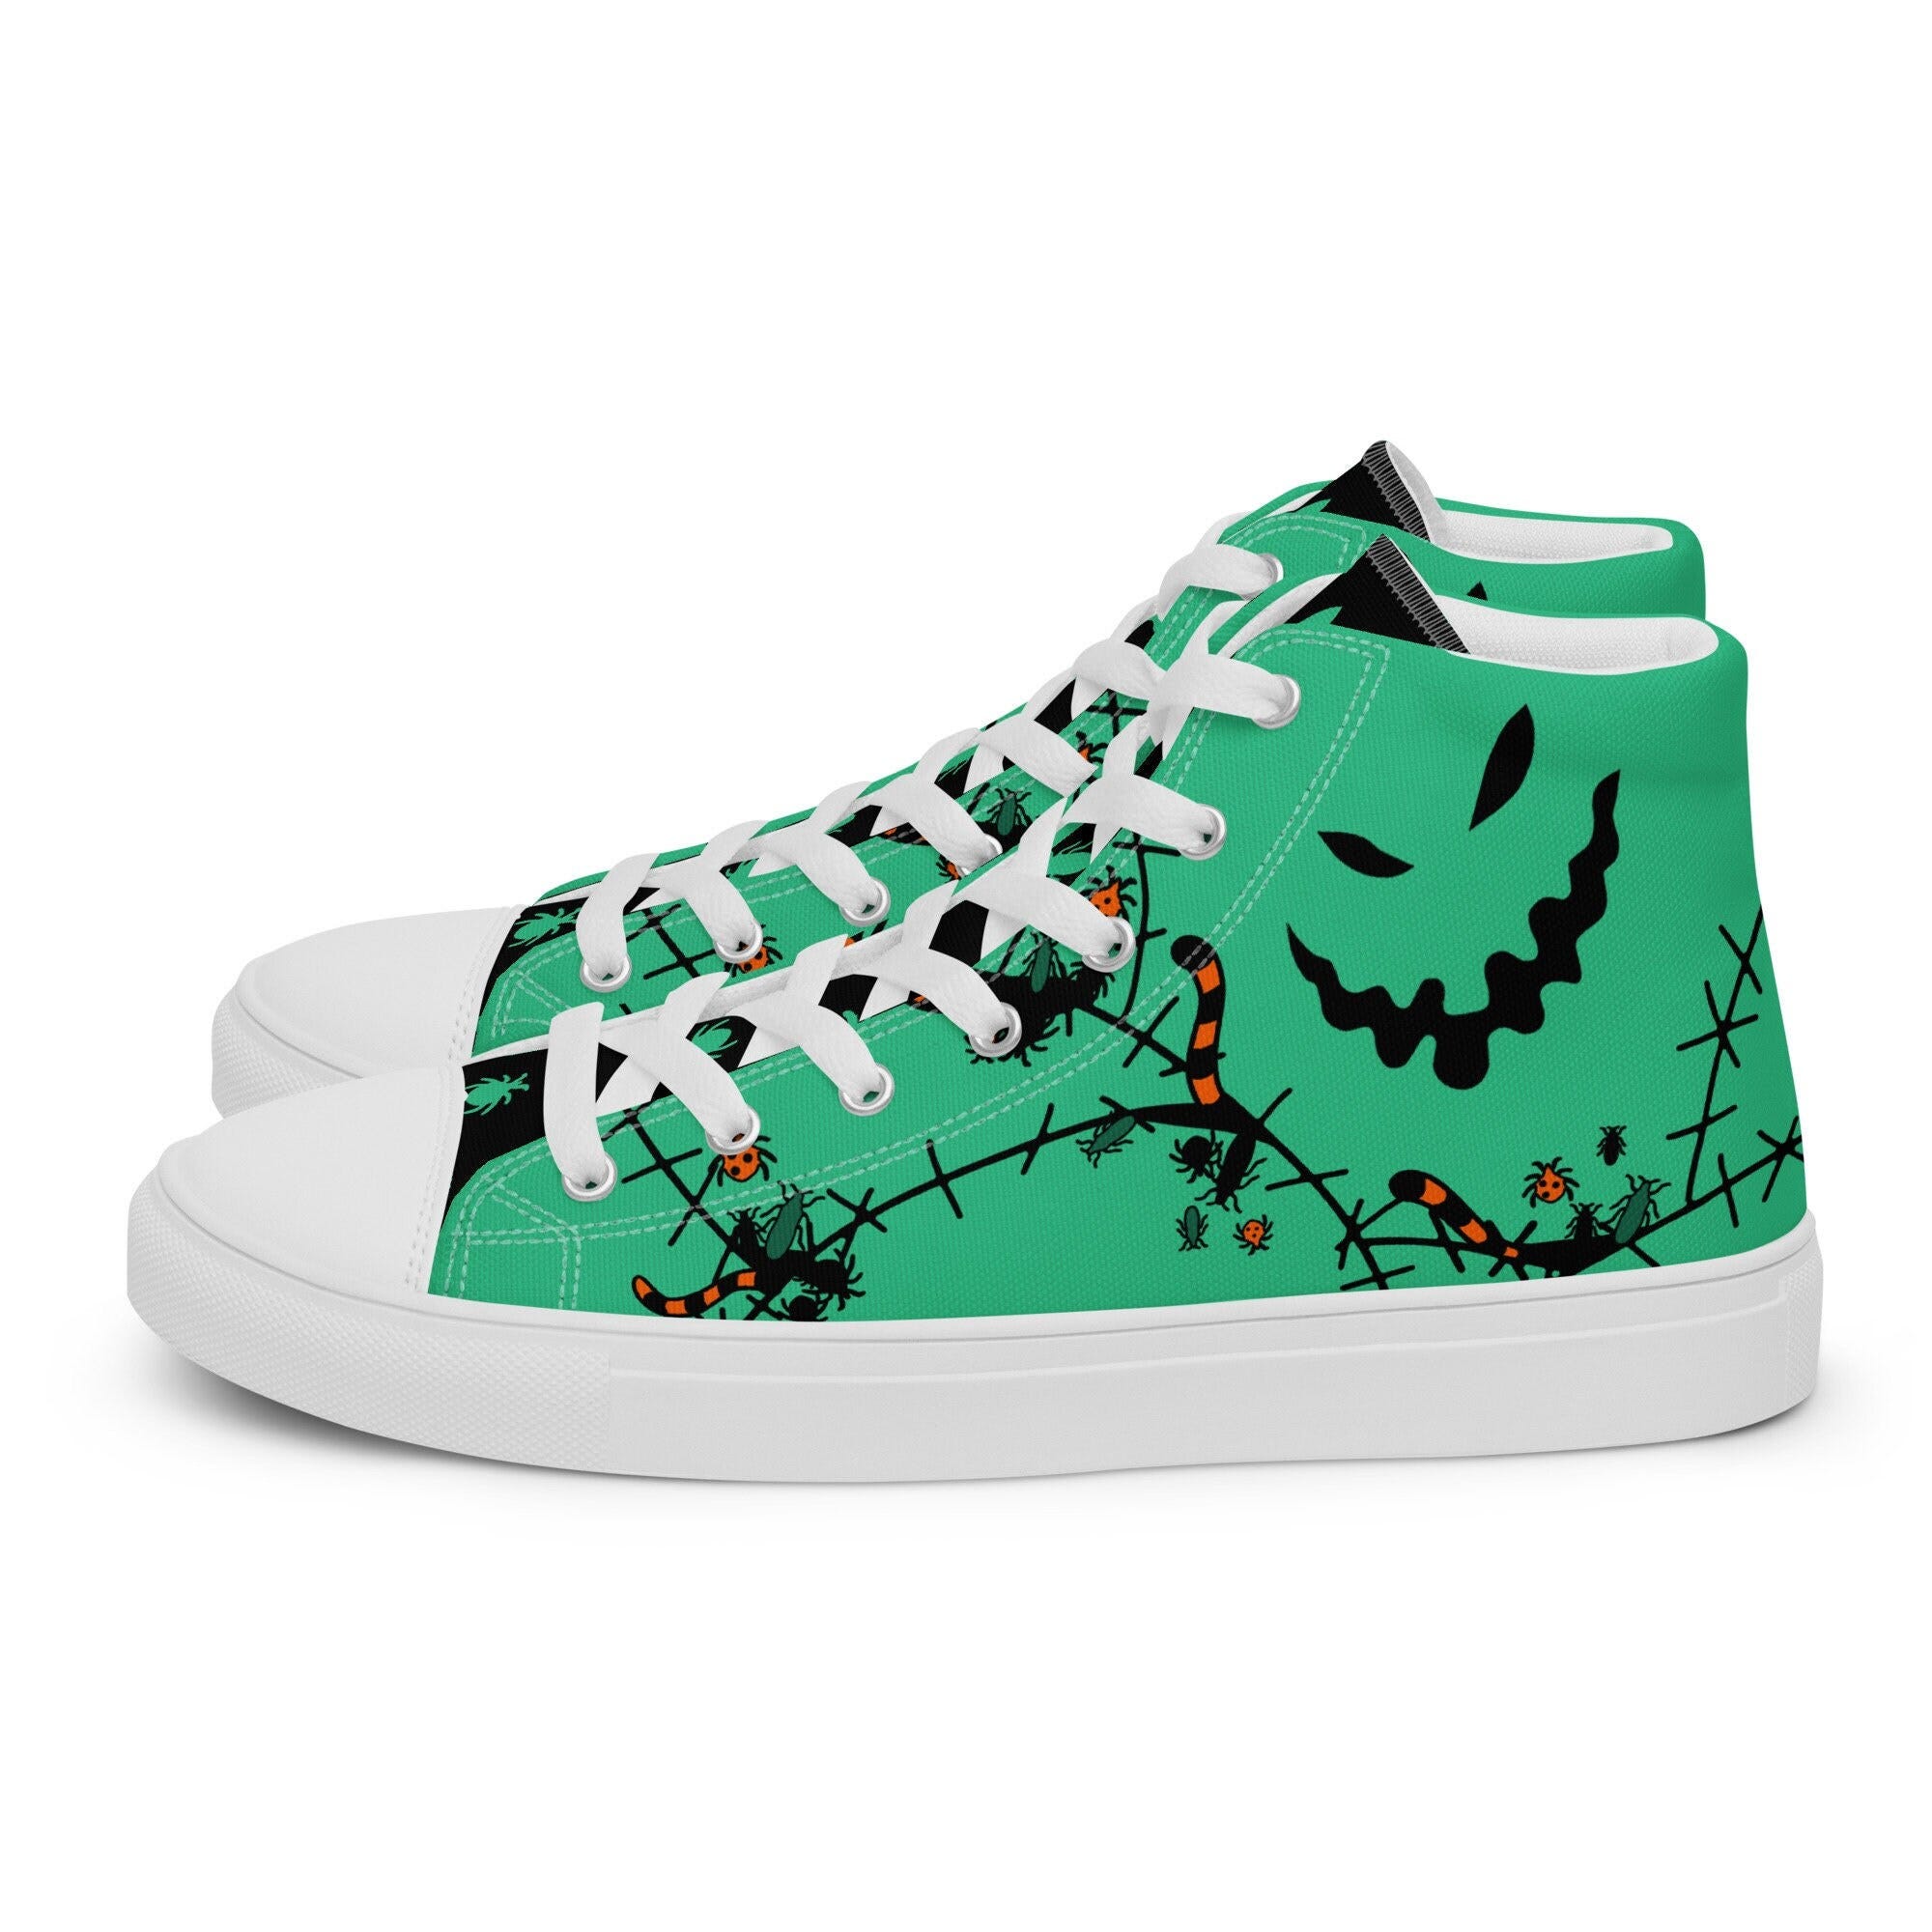 Women’s Oogie Boogie high top canvas shoes